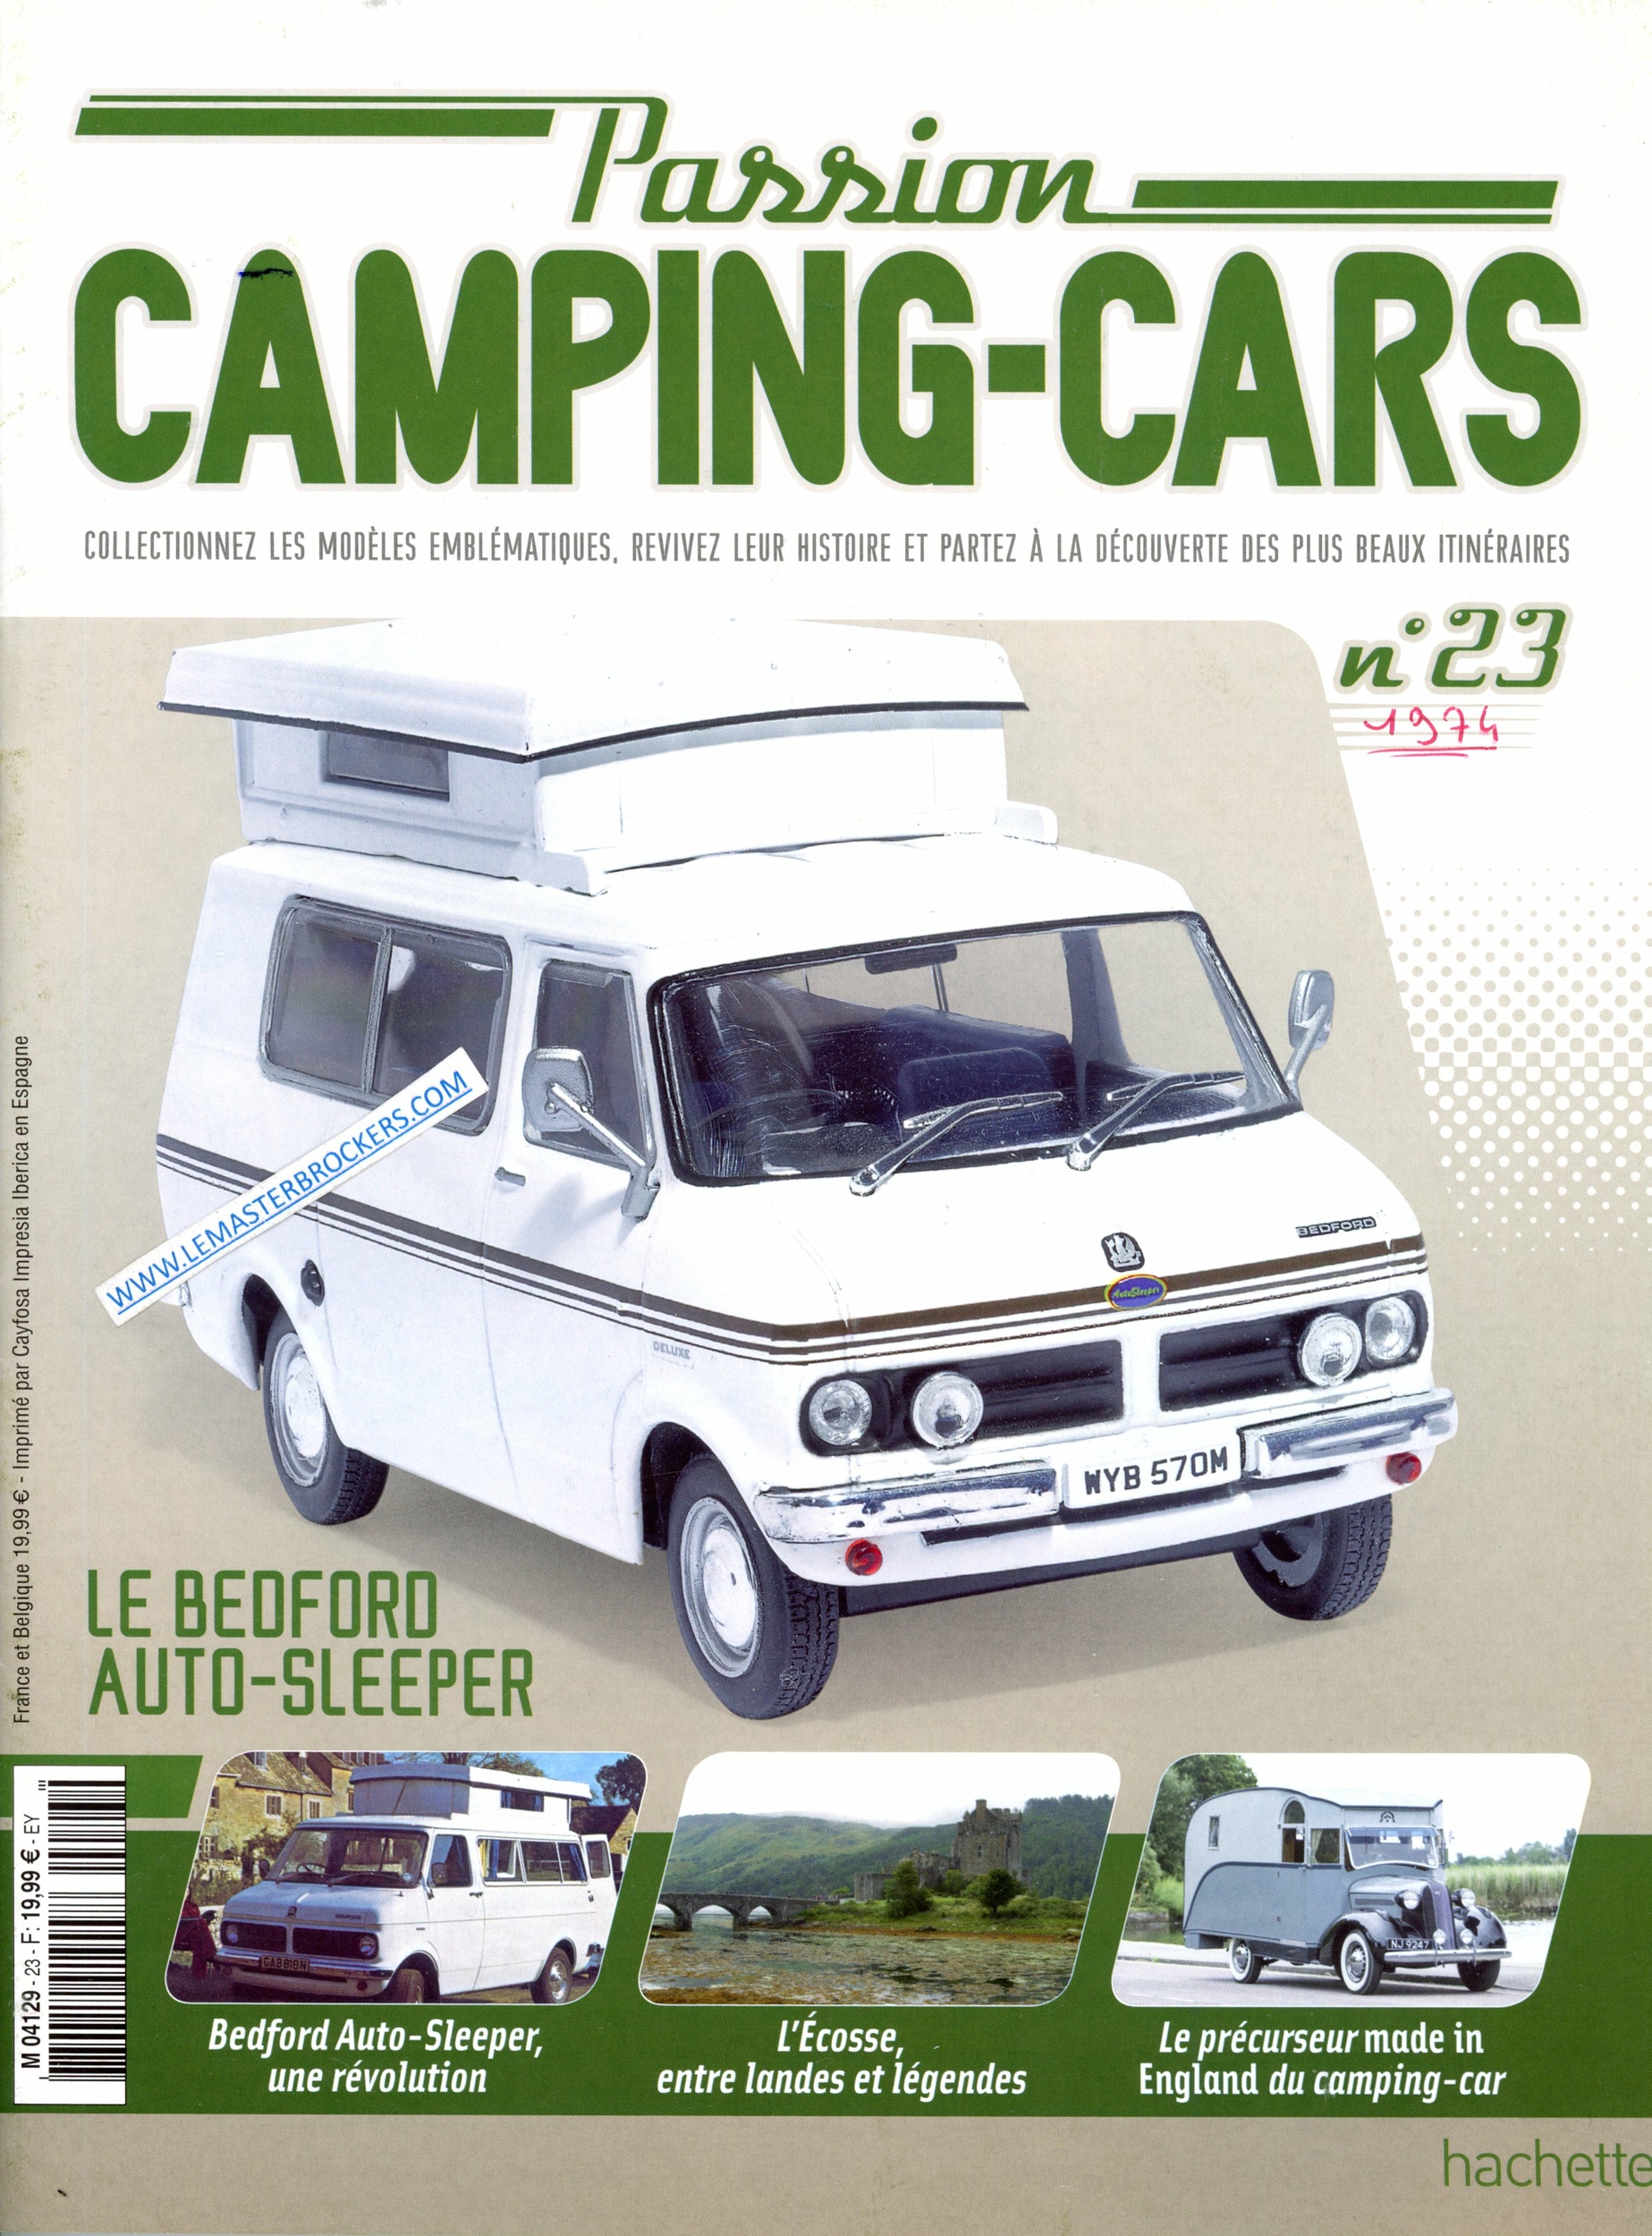 BEDFORD AUTO SLEEPER PASSION CAMPING-CARS